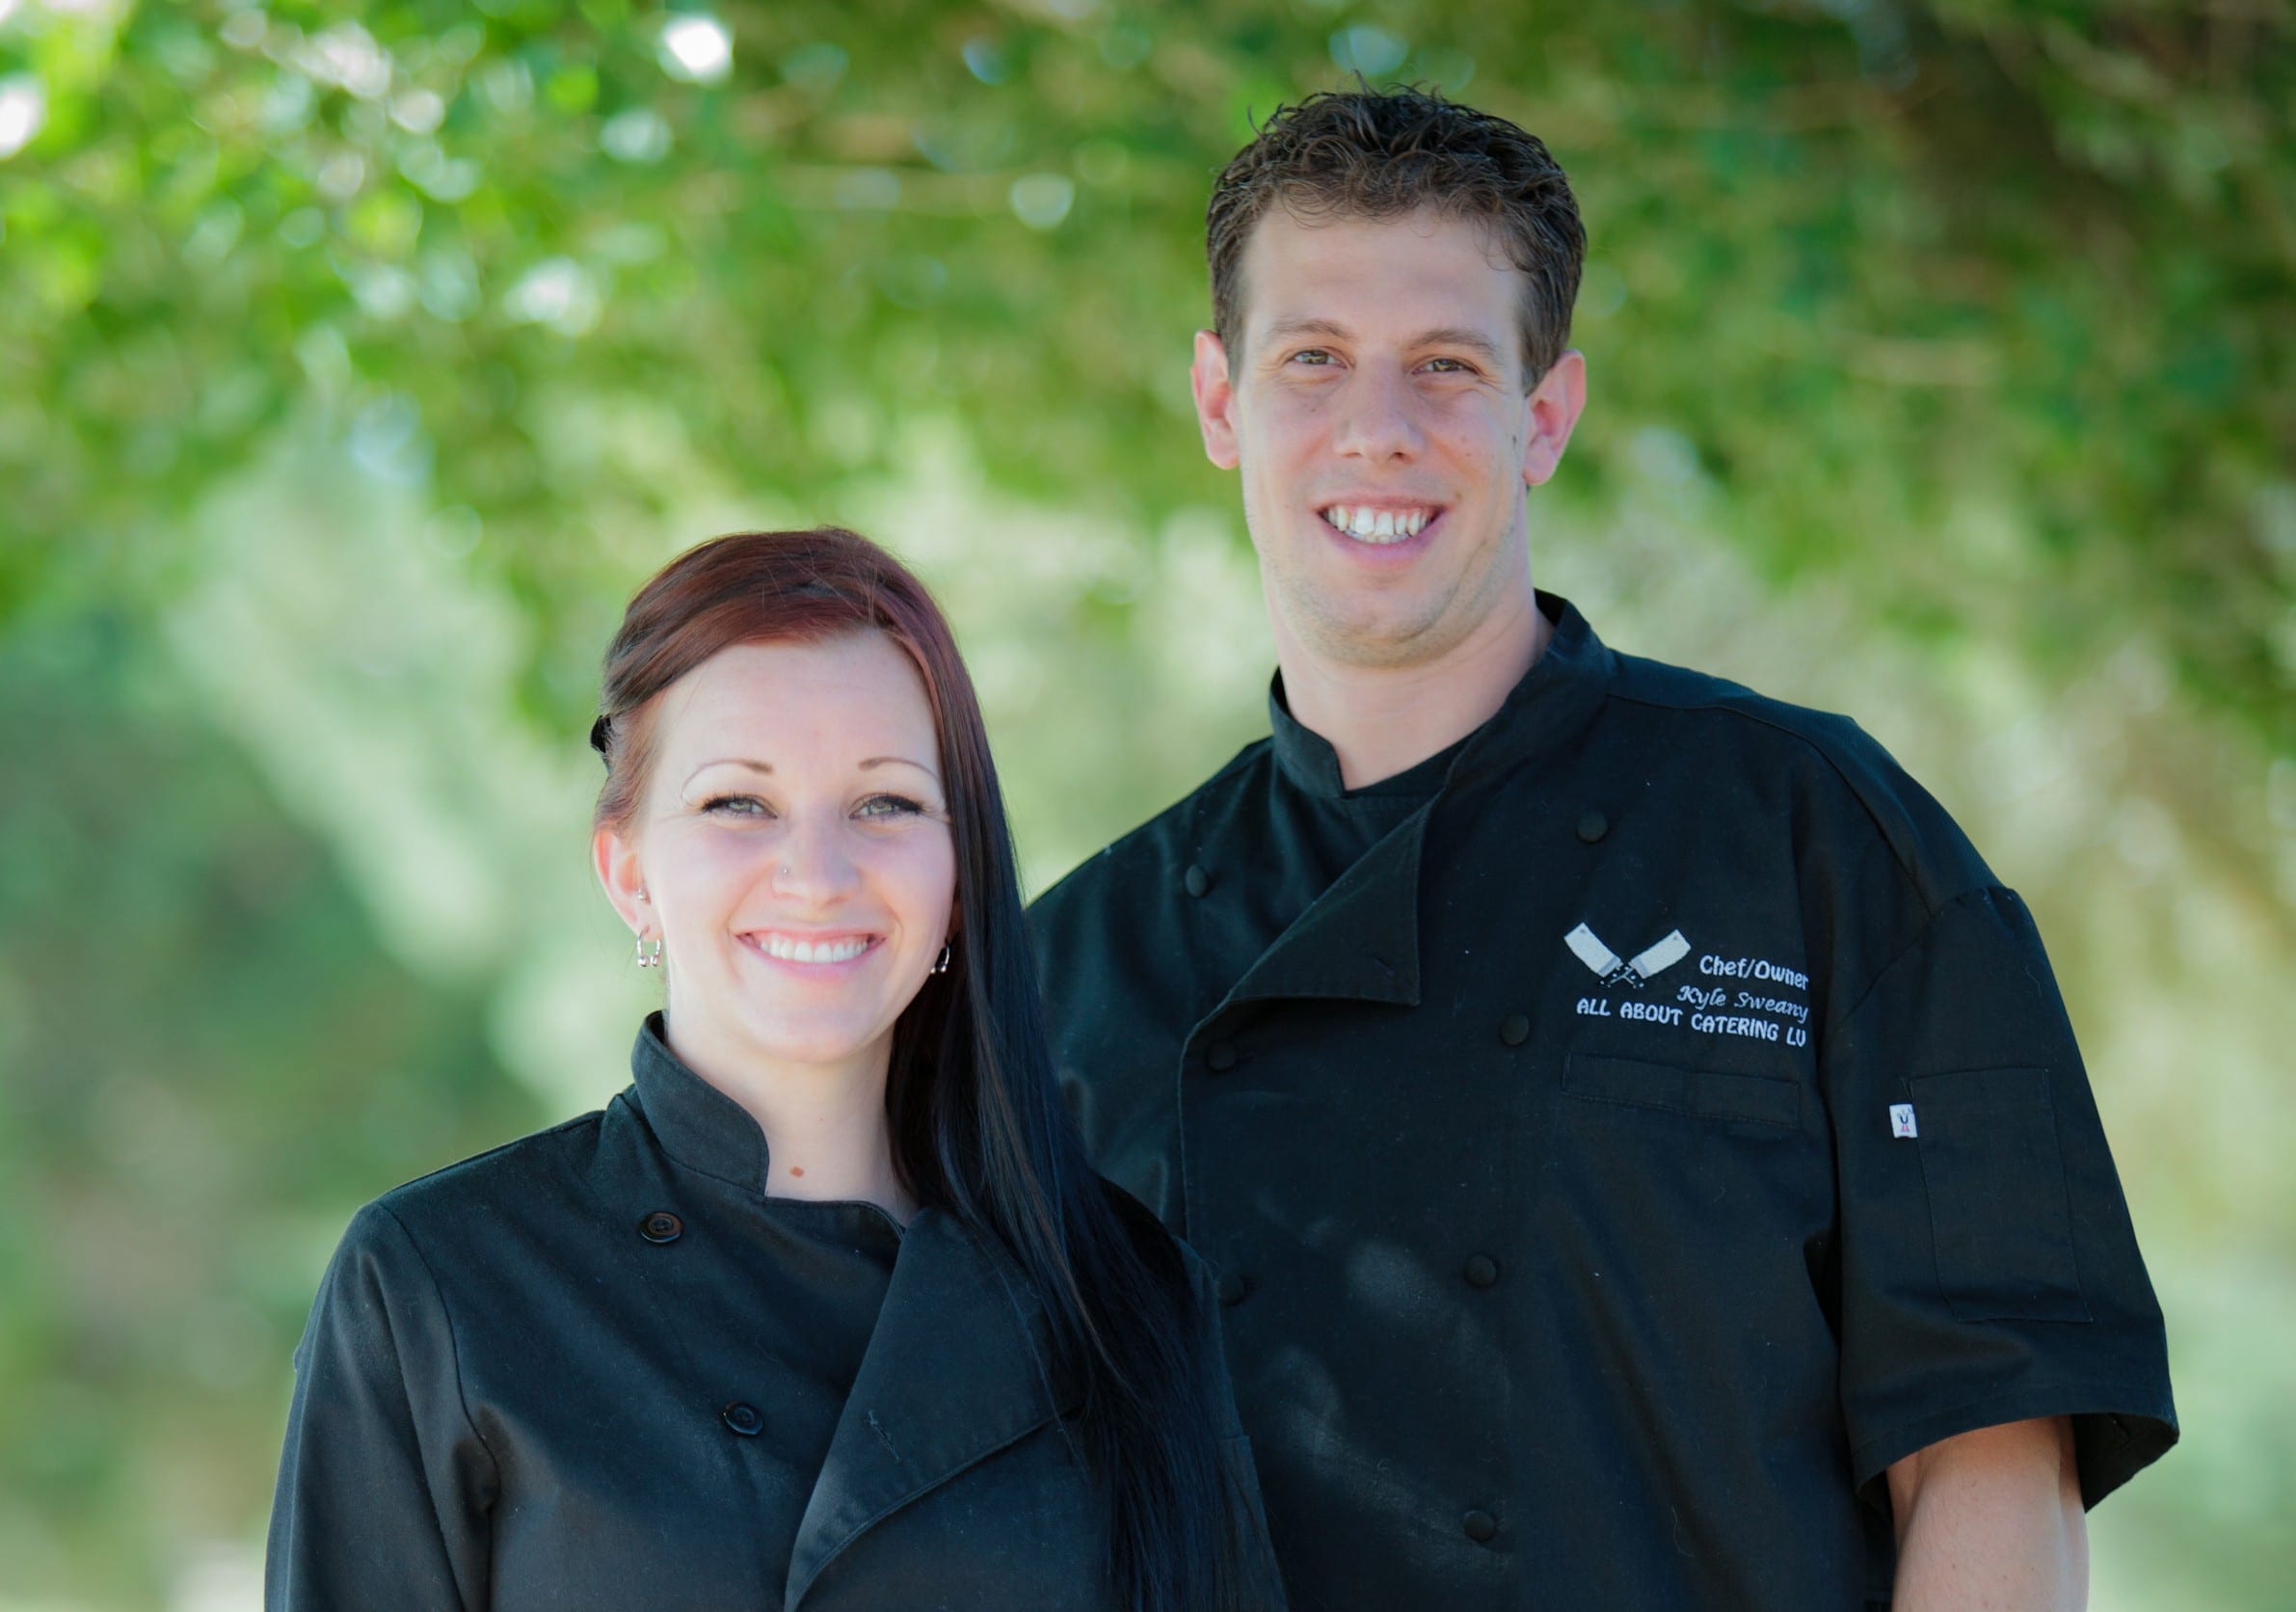 All About Catering Las Vegas - Food Photographer